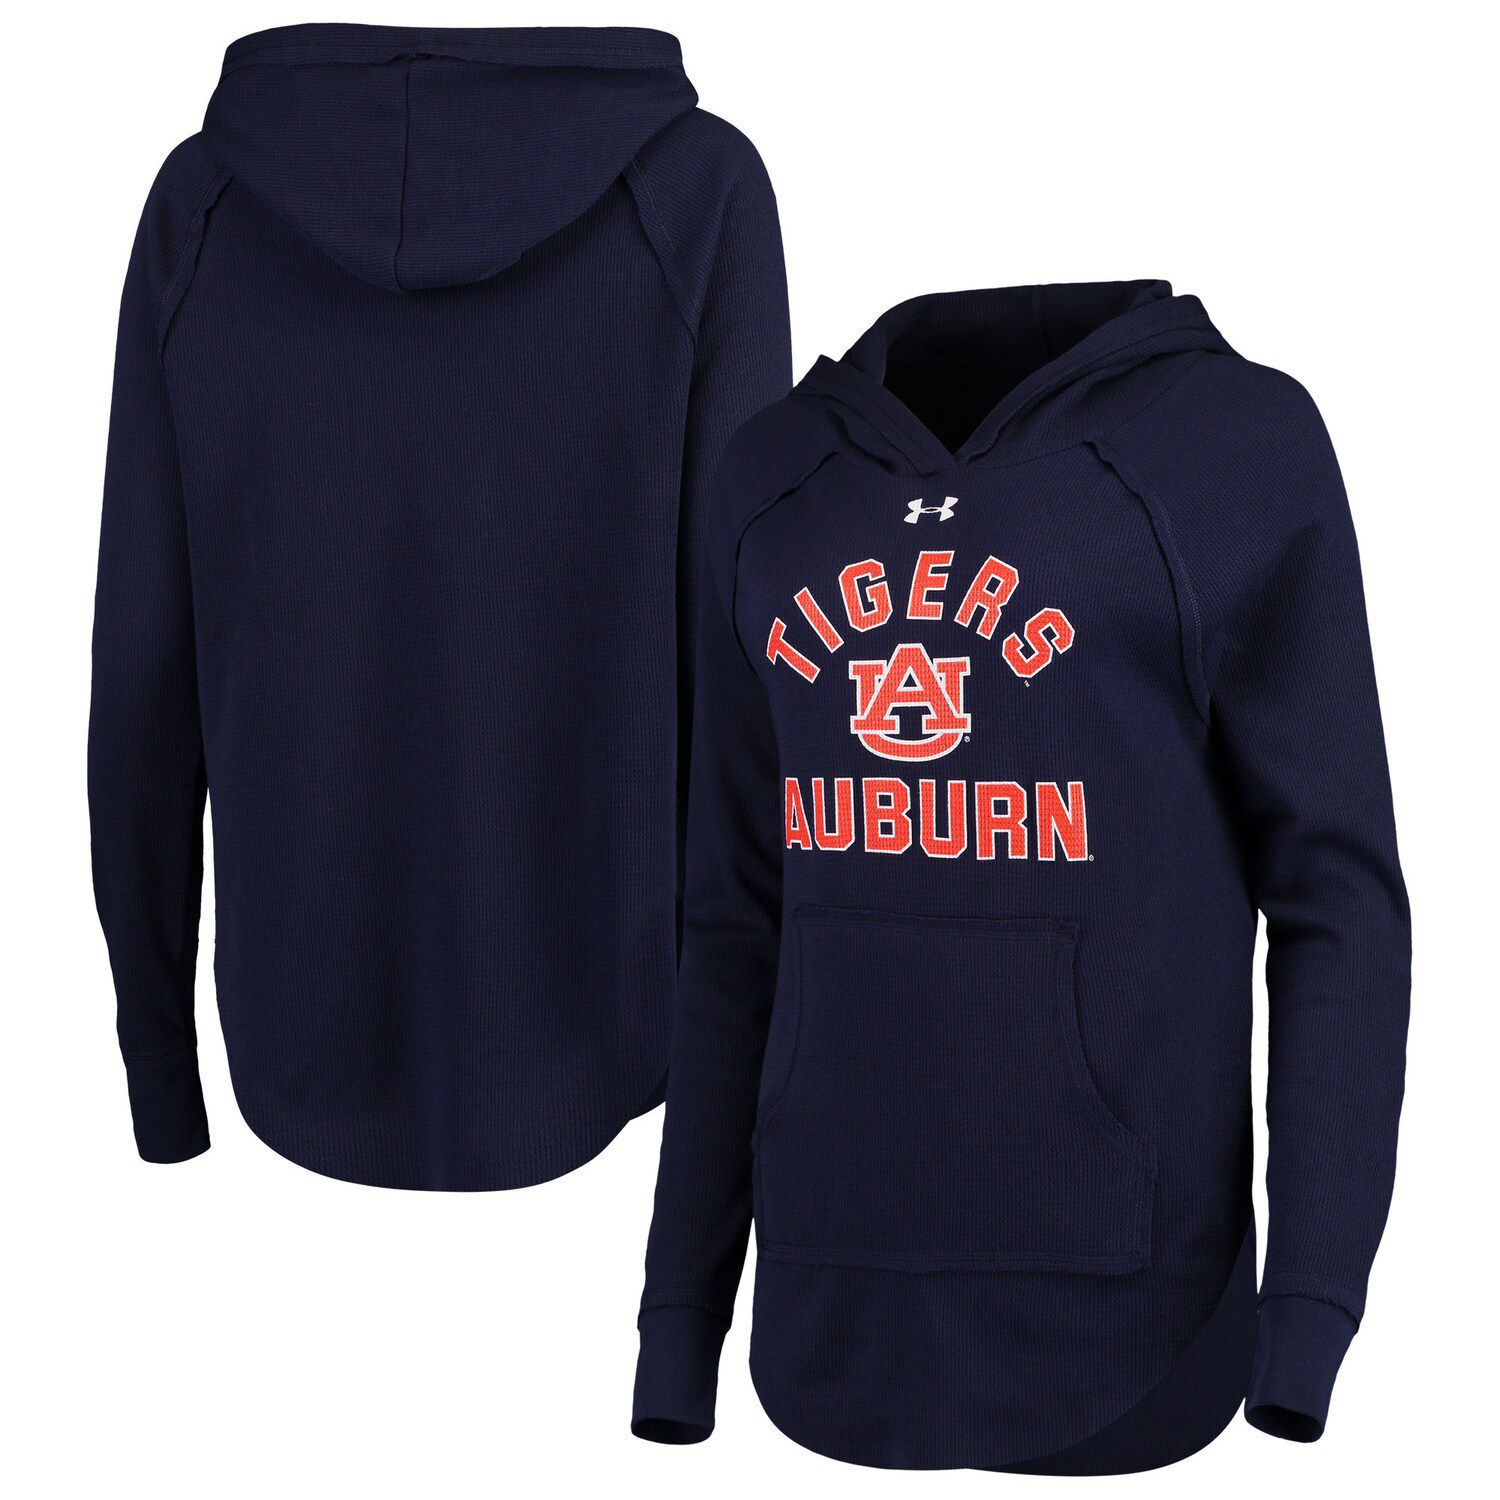 under armour women's waffle hoodie